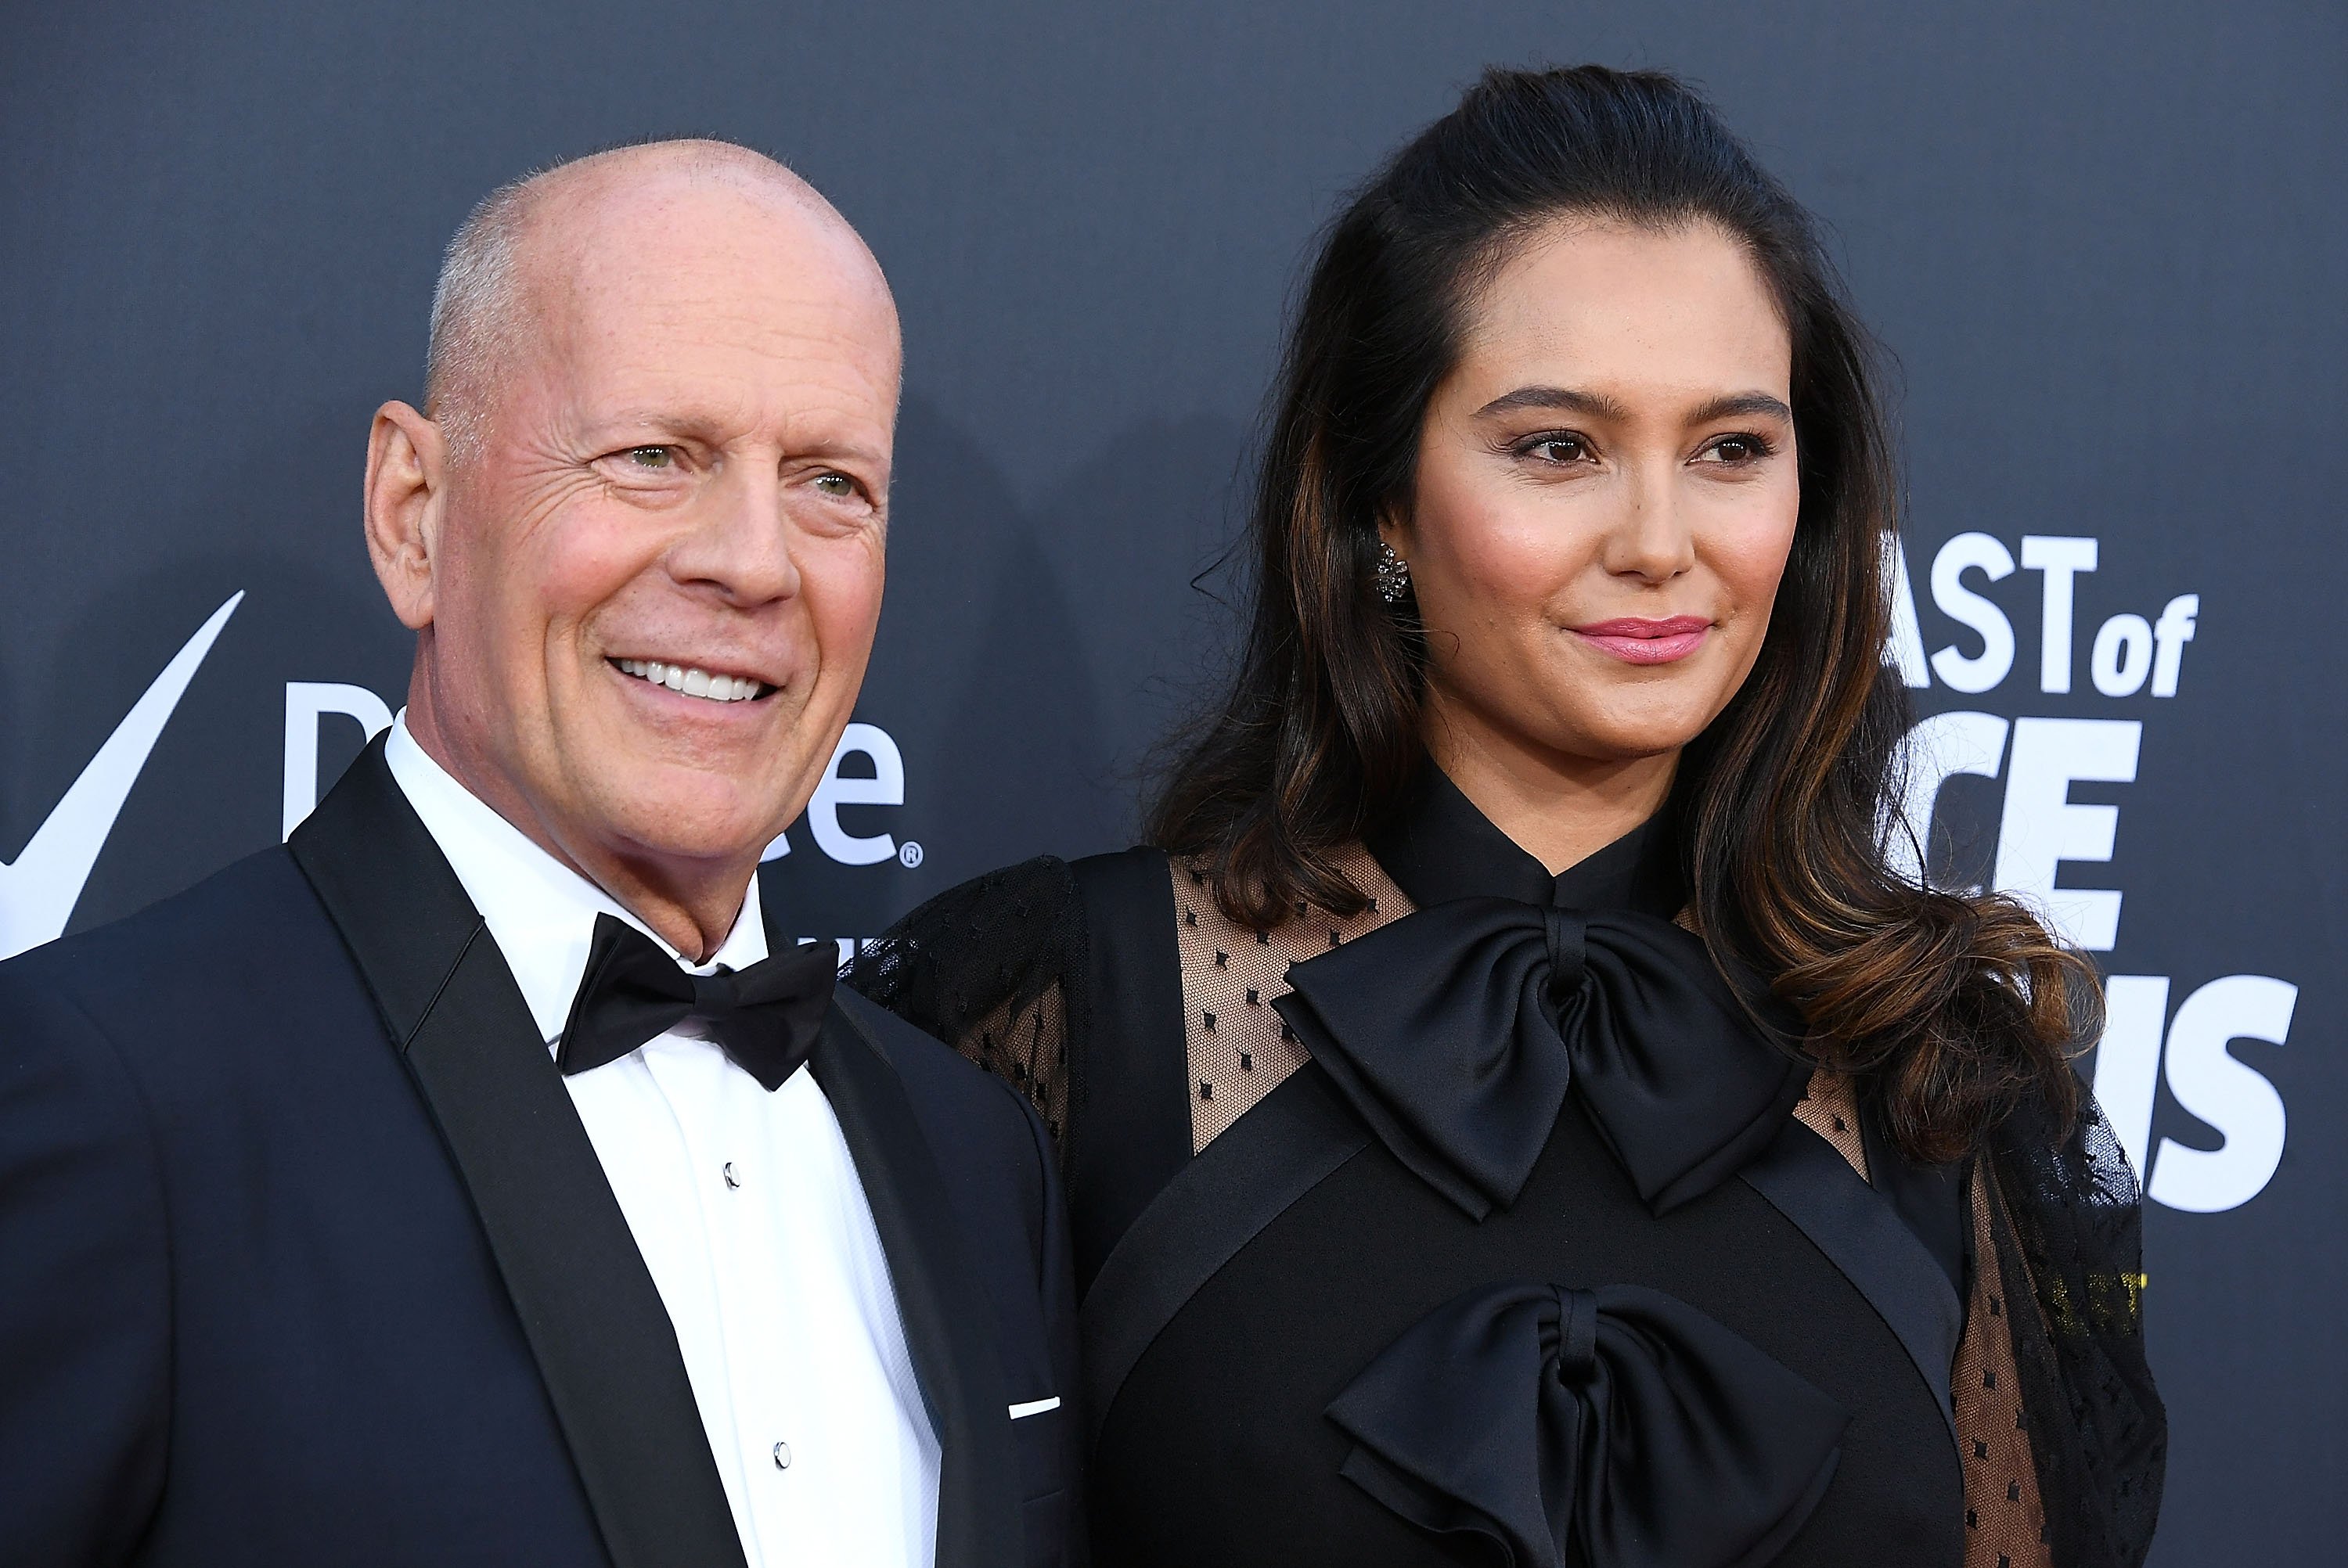 Bruce Willis and his wife, Emma Heming, pose together as they arrives at the Comedy Central Roast of Bruce Willis